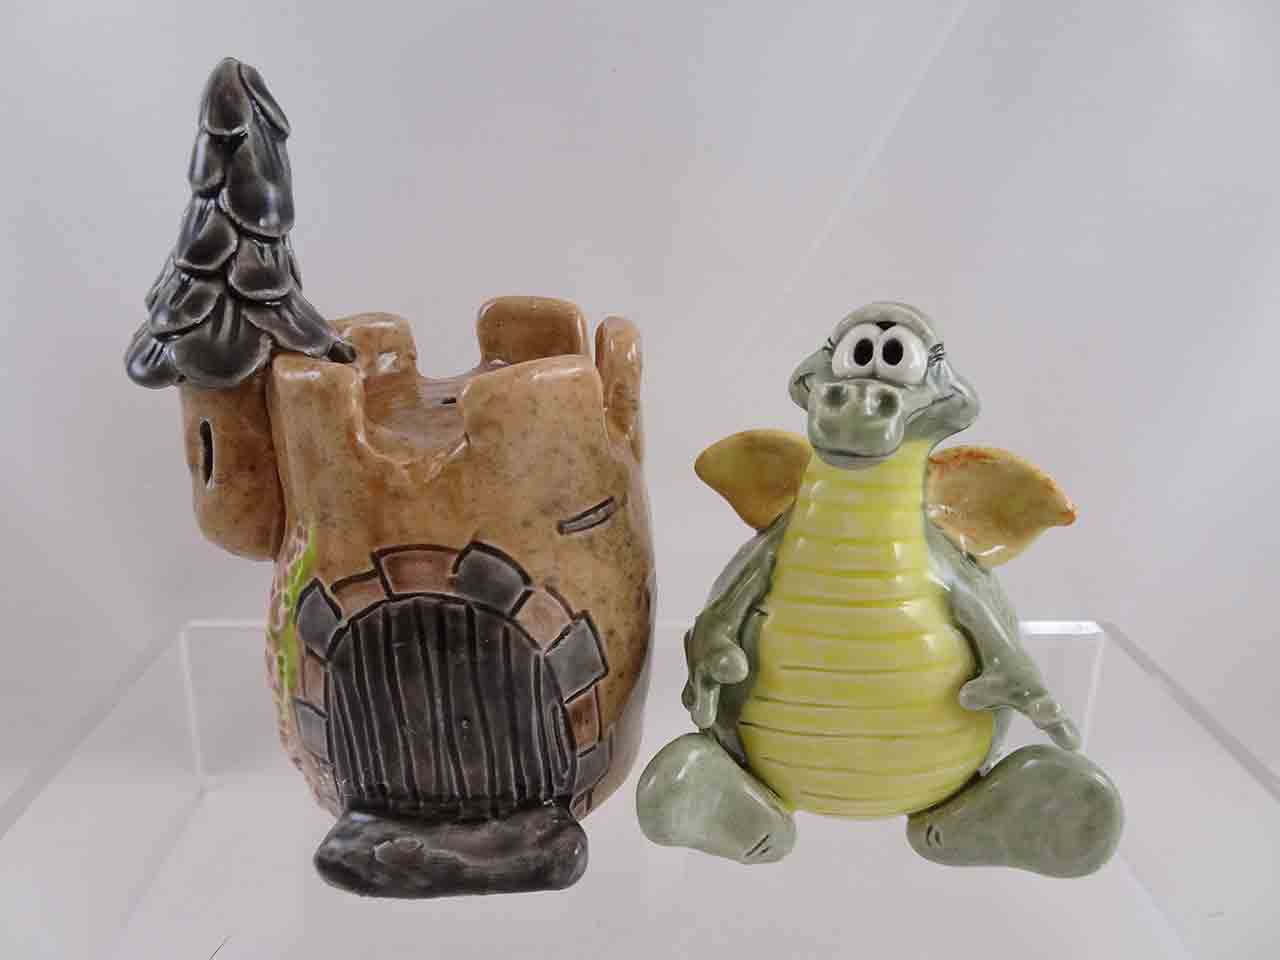 Dragon & castle salt and pepper shakers by Kath Jamison